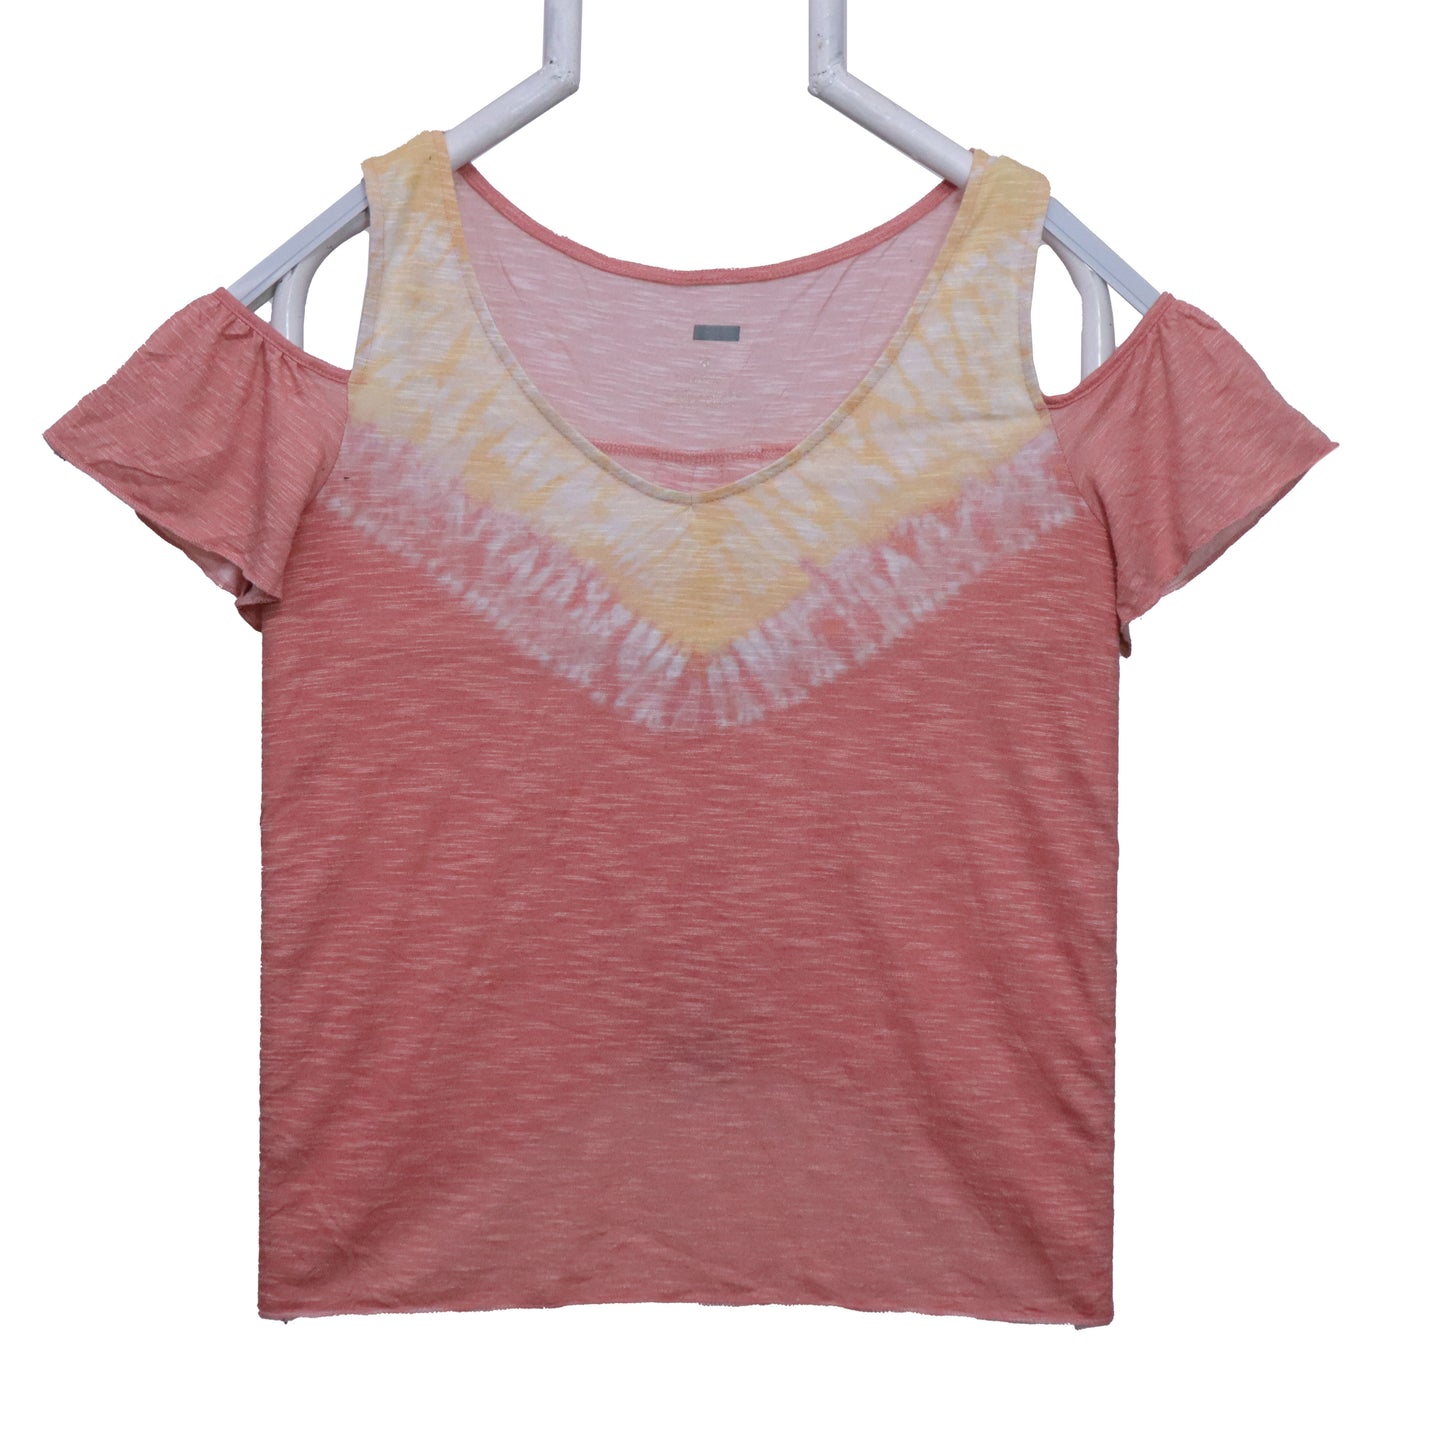 CLASSIC PINK ROUND NECK TOP